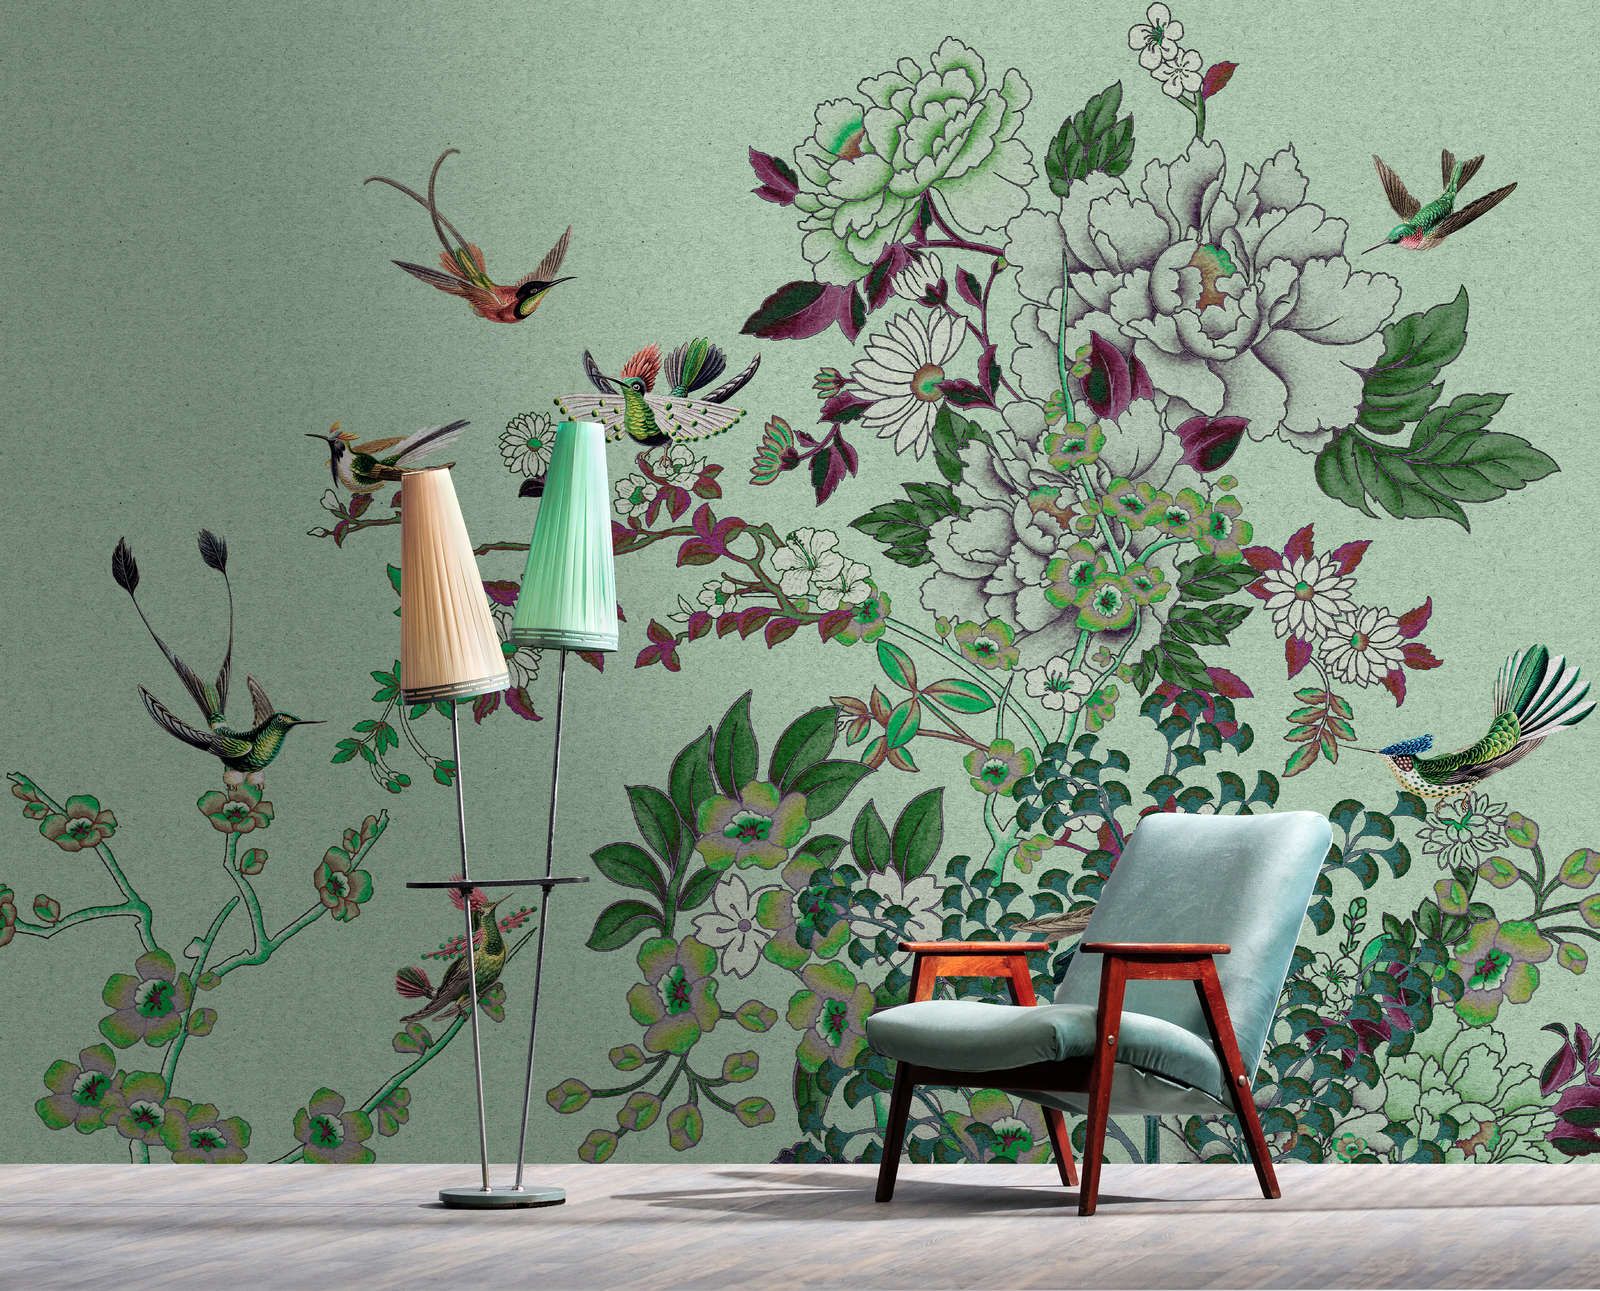             Photo wallpaper »madras 1« - Green blossom motif with birds on kraft paper texture - Smooth, slightly shiny premium non-woven fabric
        